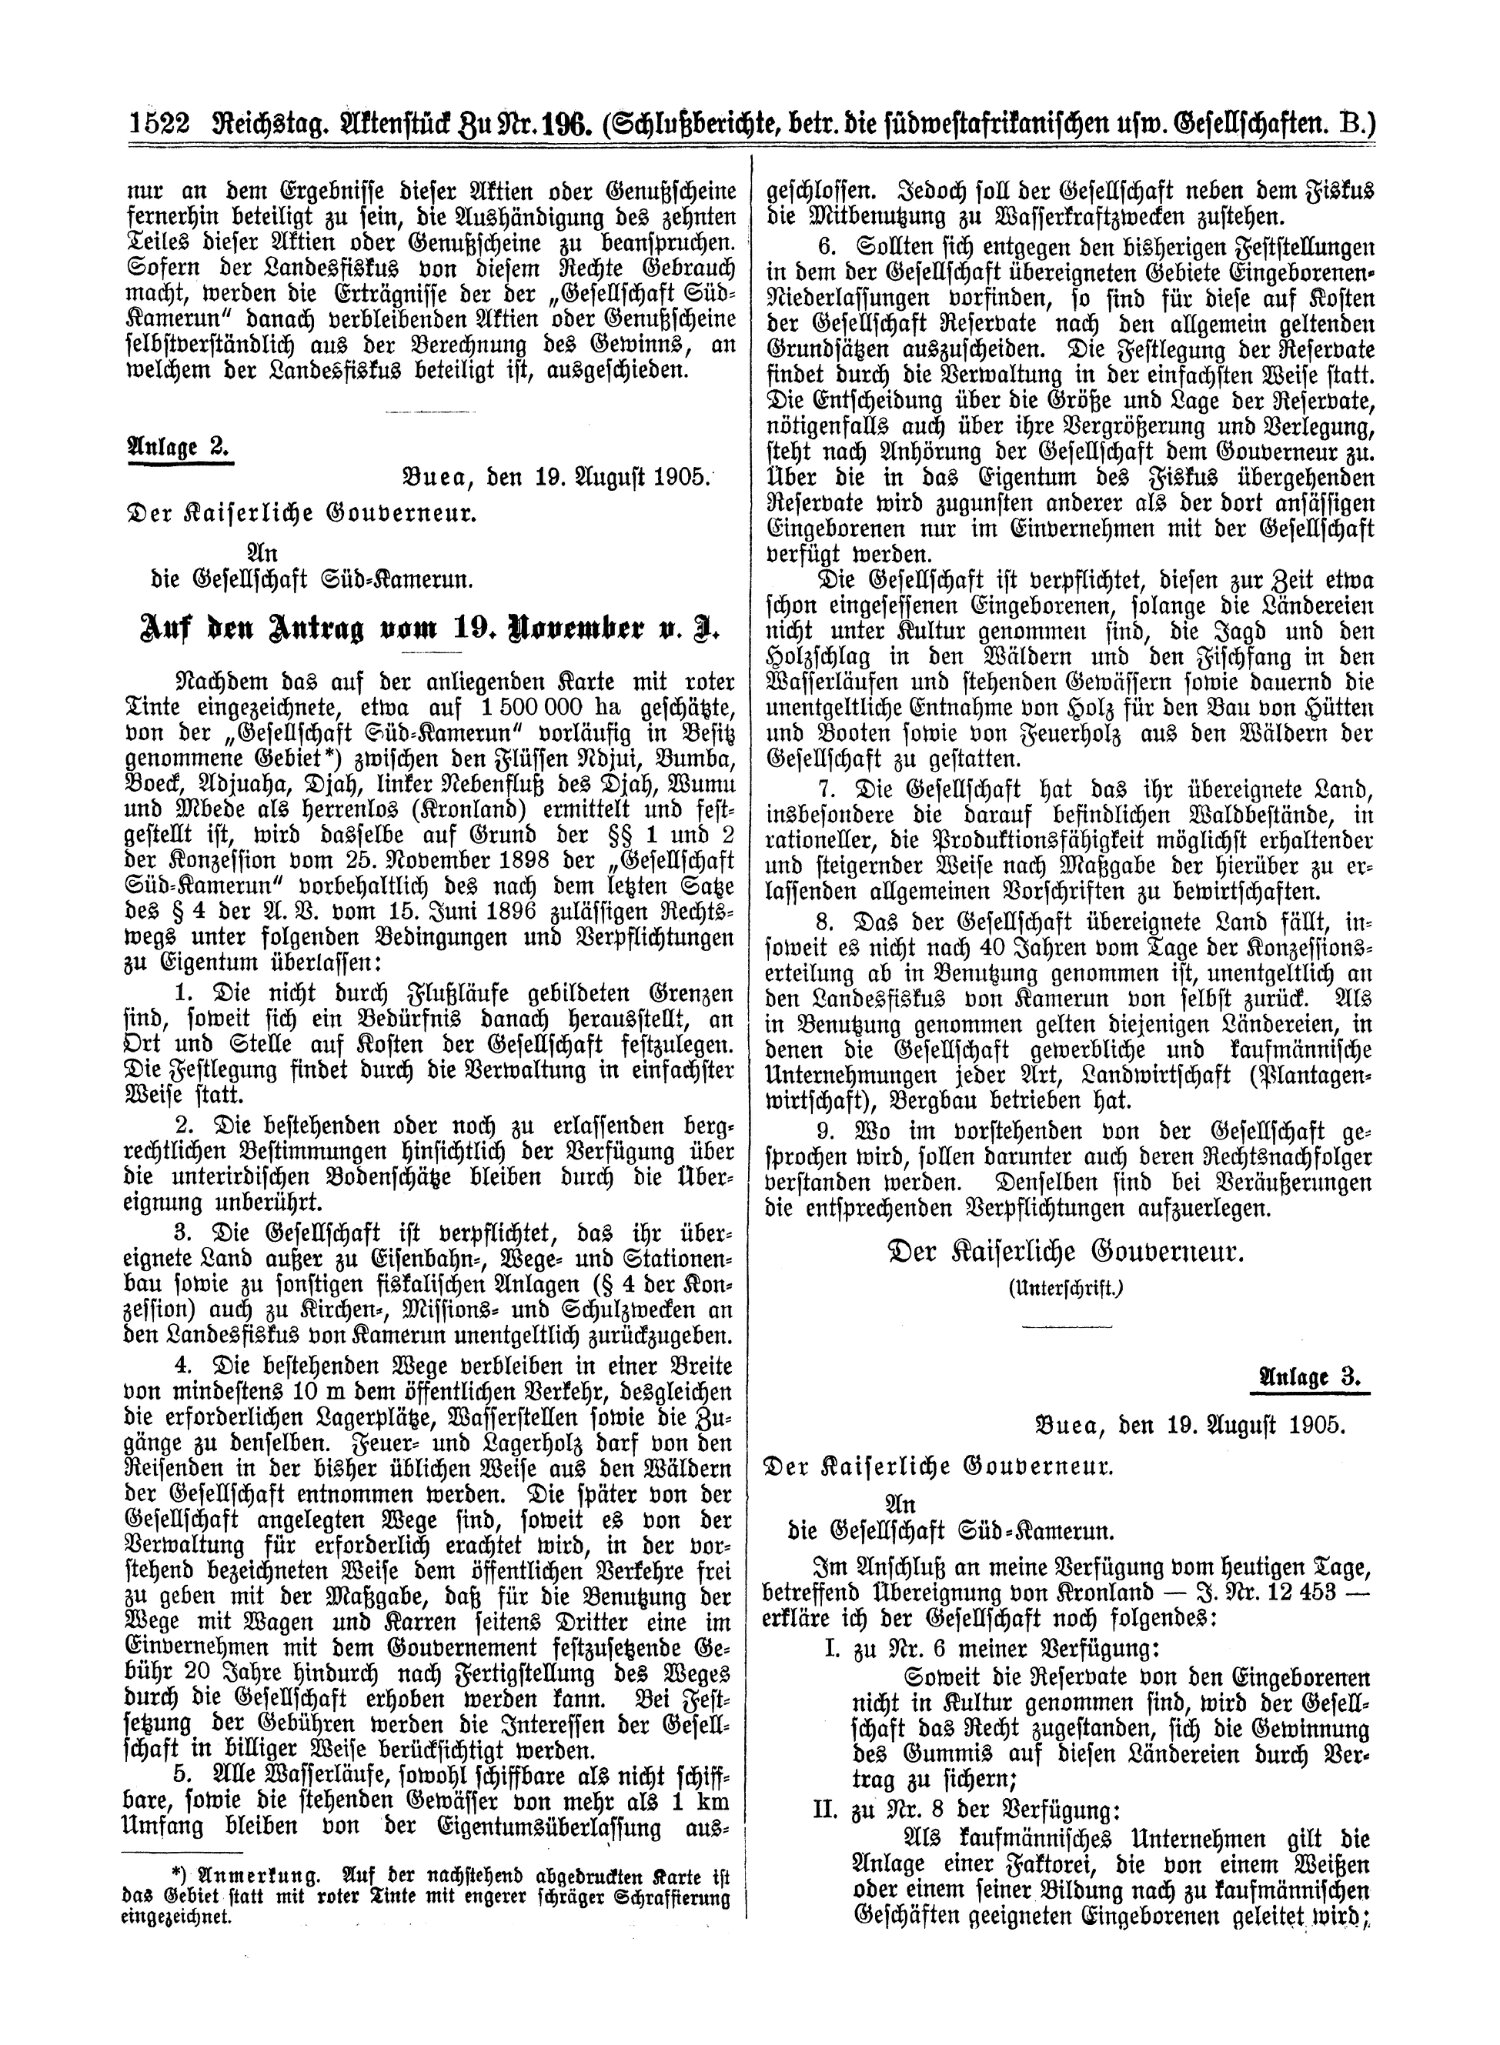 Scan of page 1522